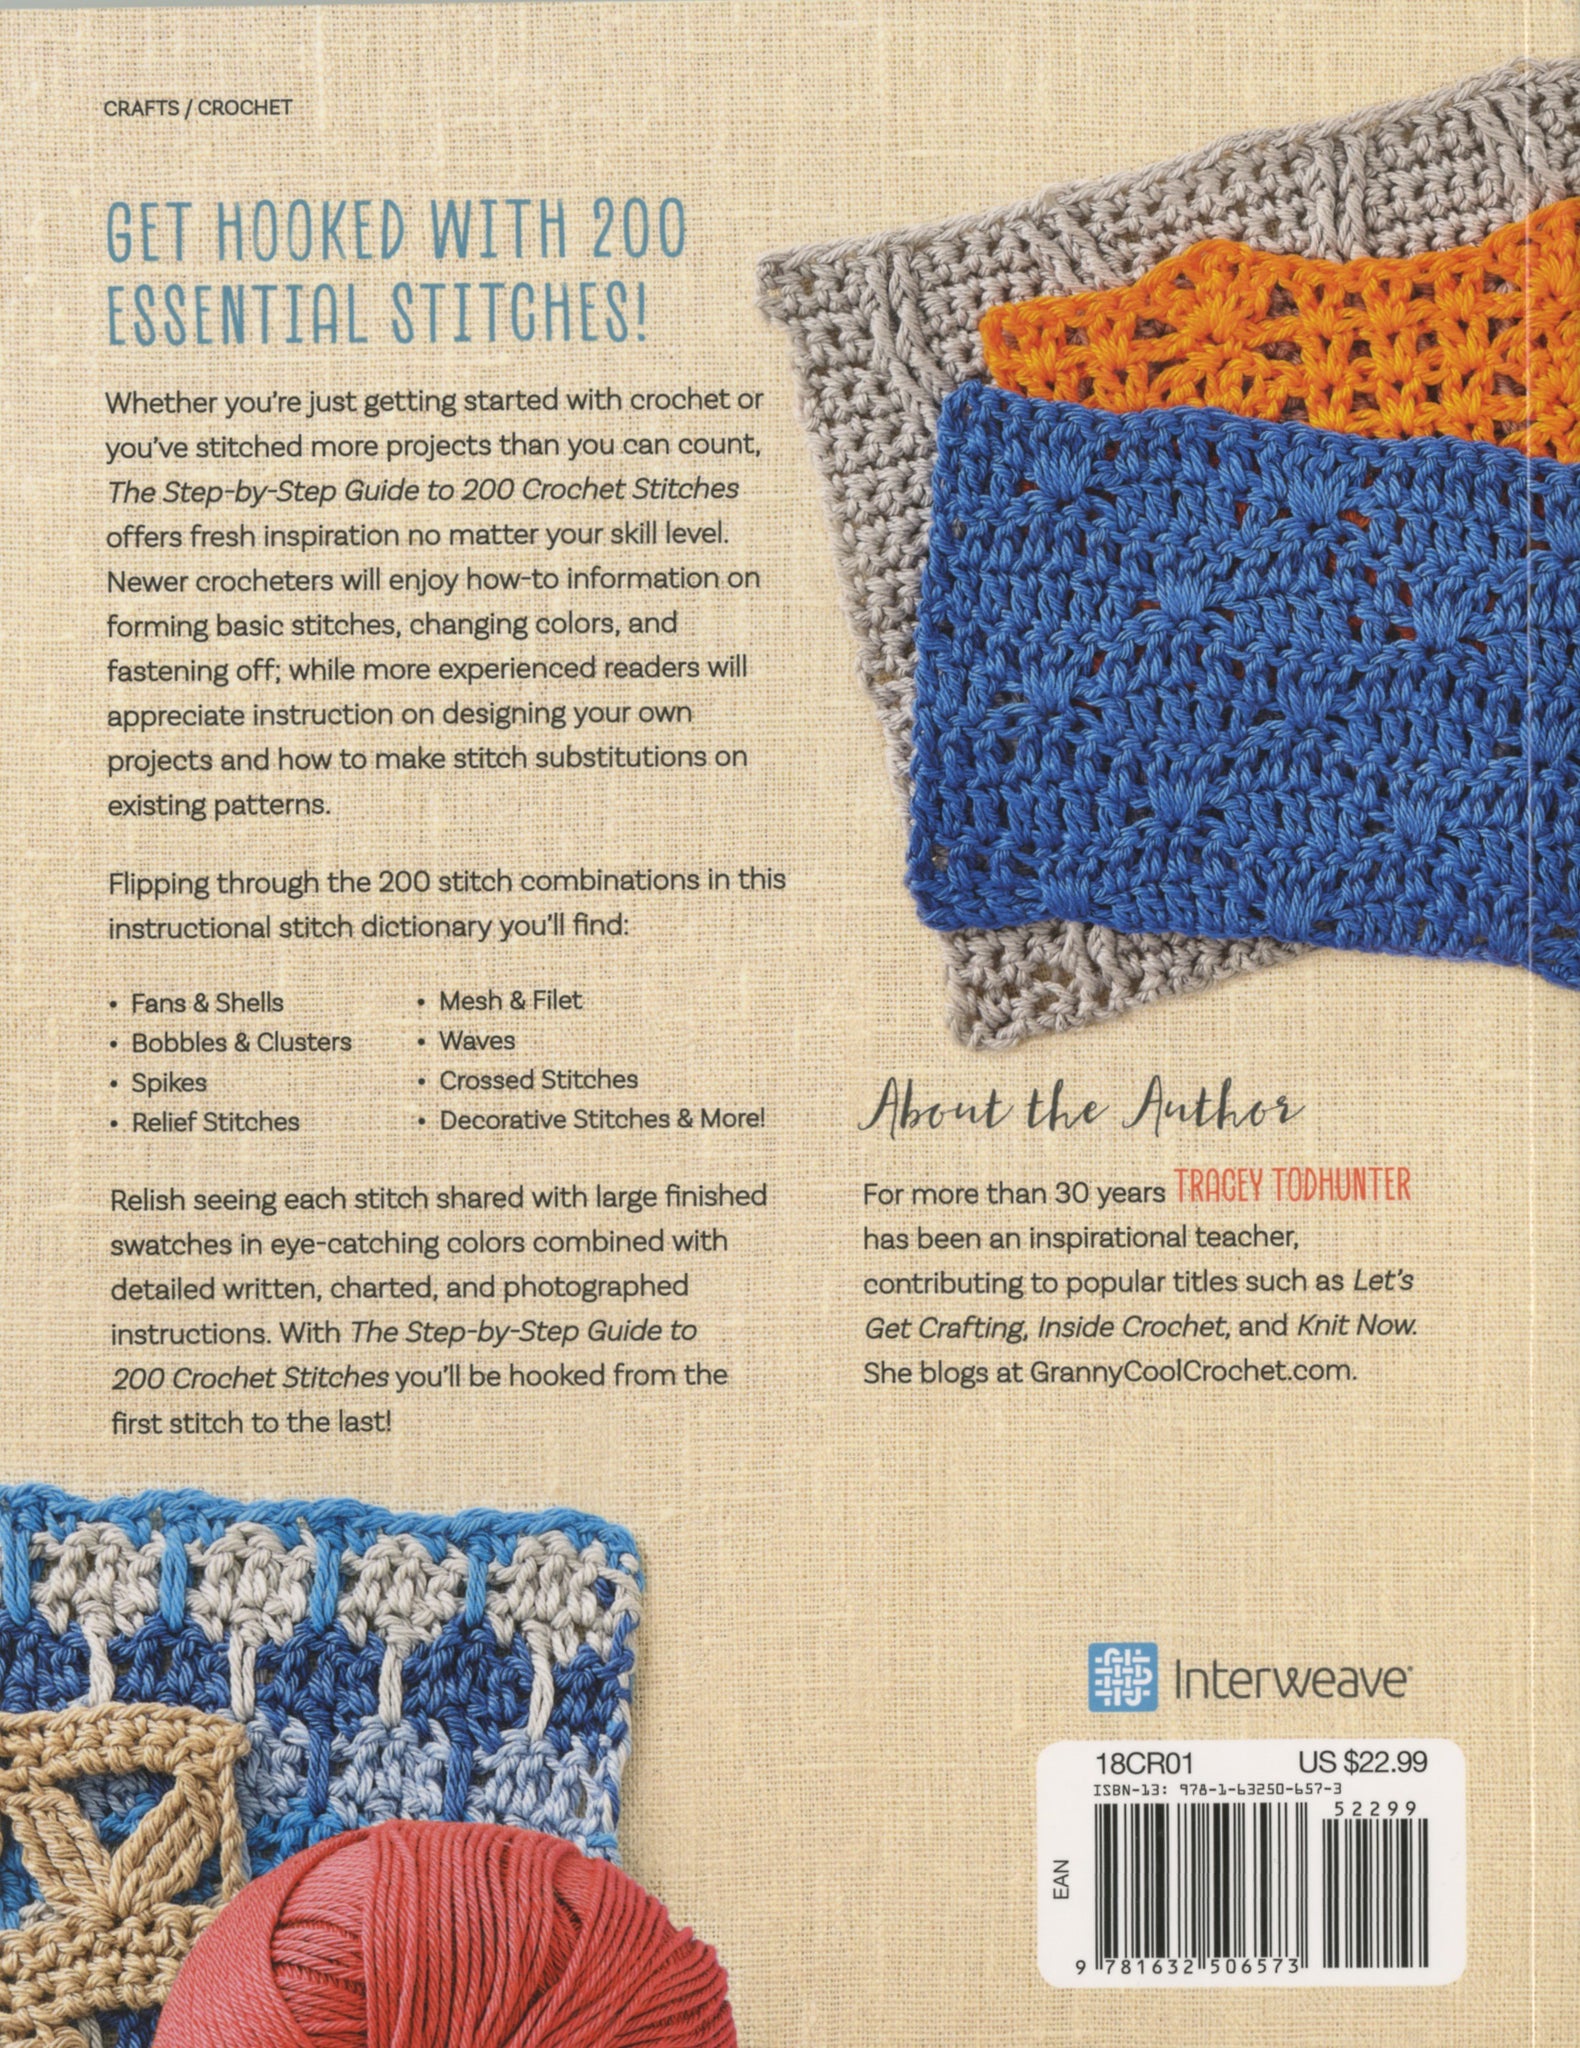 Crochet Stitches Step-By-Step: More Than 150 Essential Stitches for Your Next Project [Book]